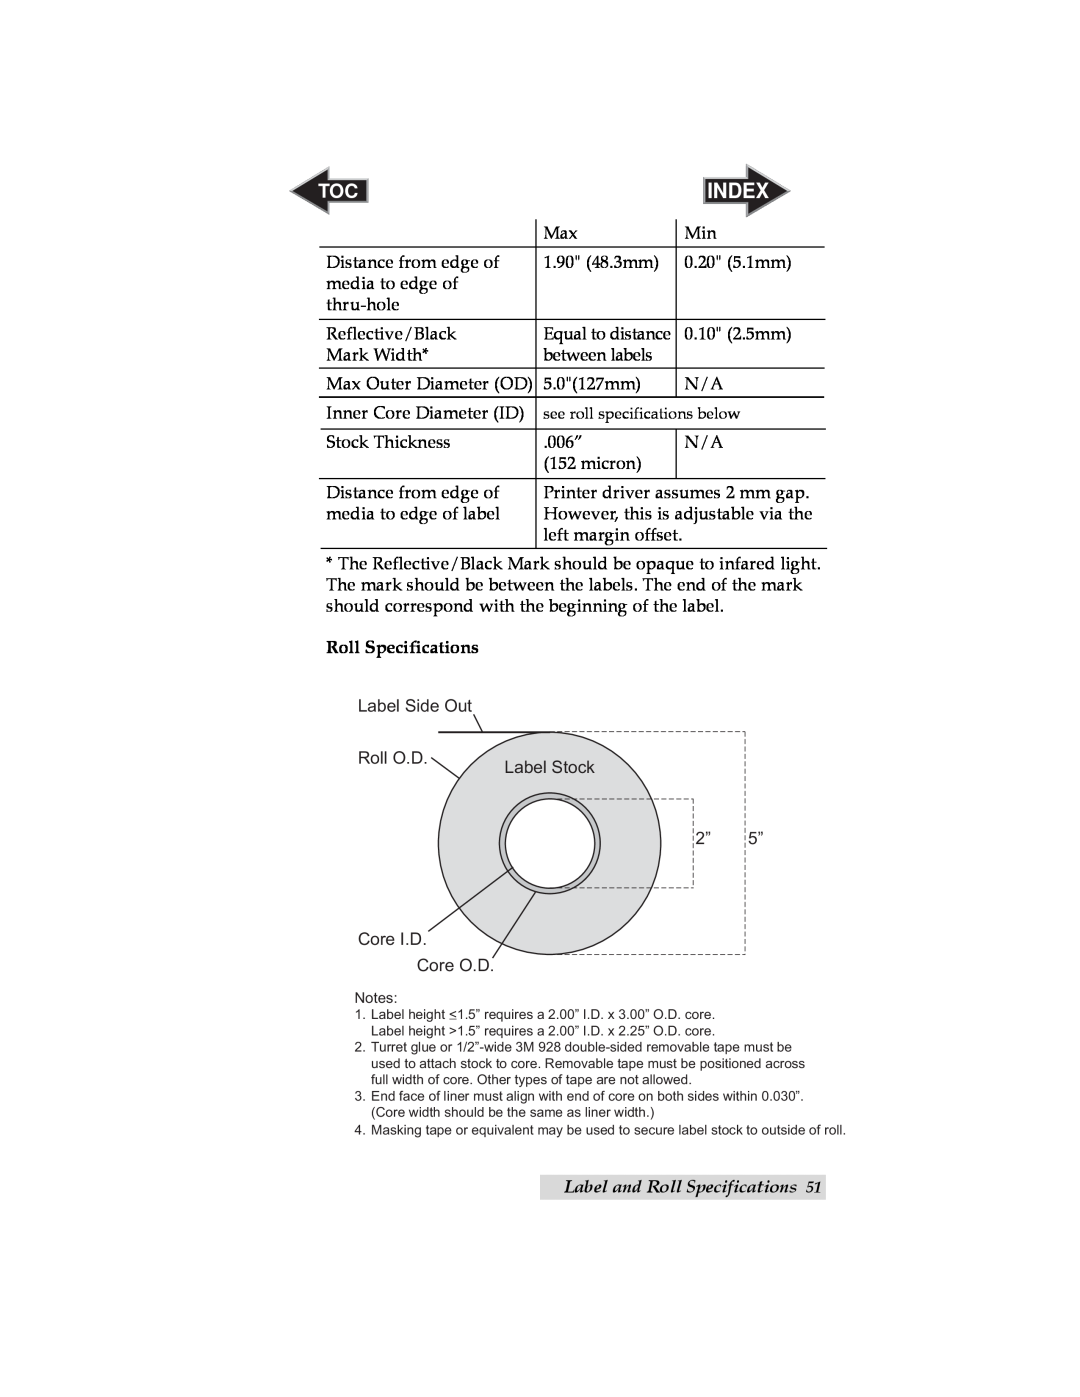 Primera Technology LX400 user manual Label and Roll Specifications, Index 